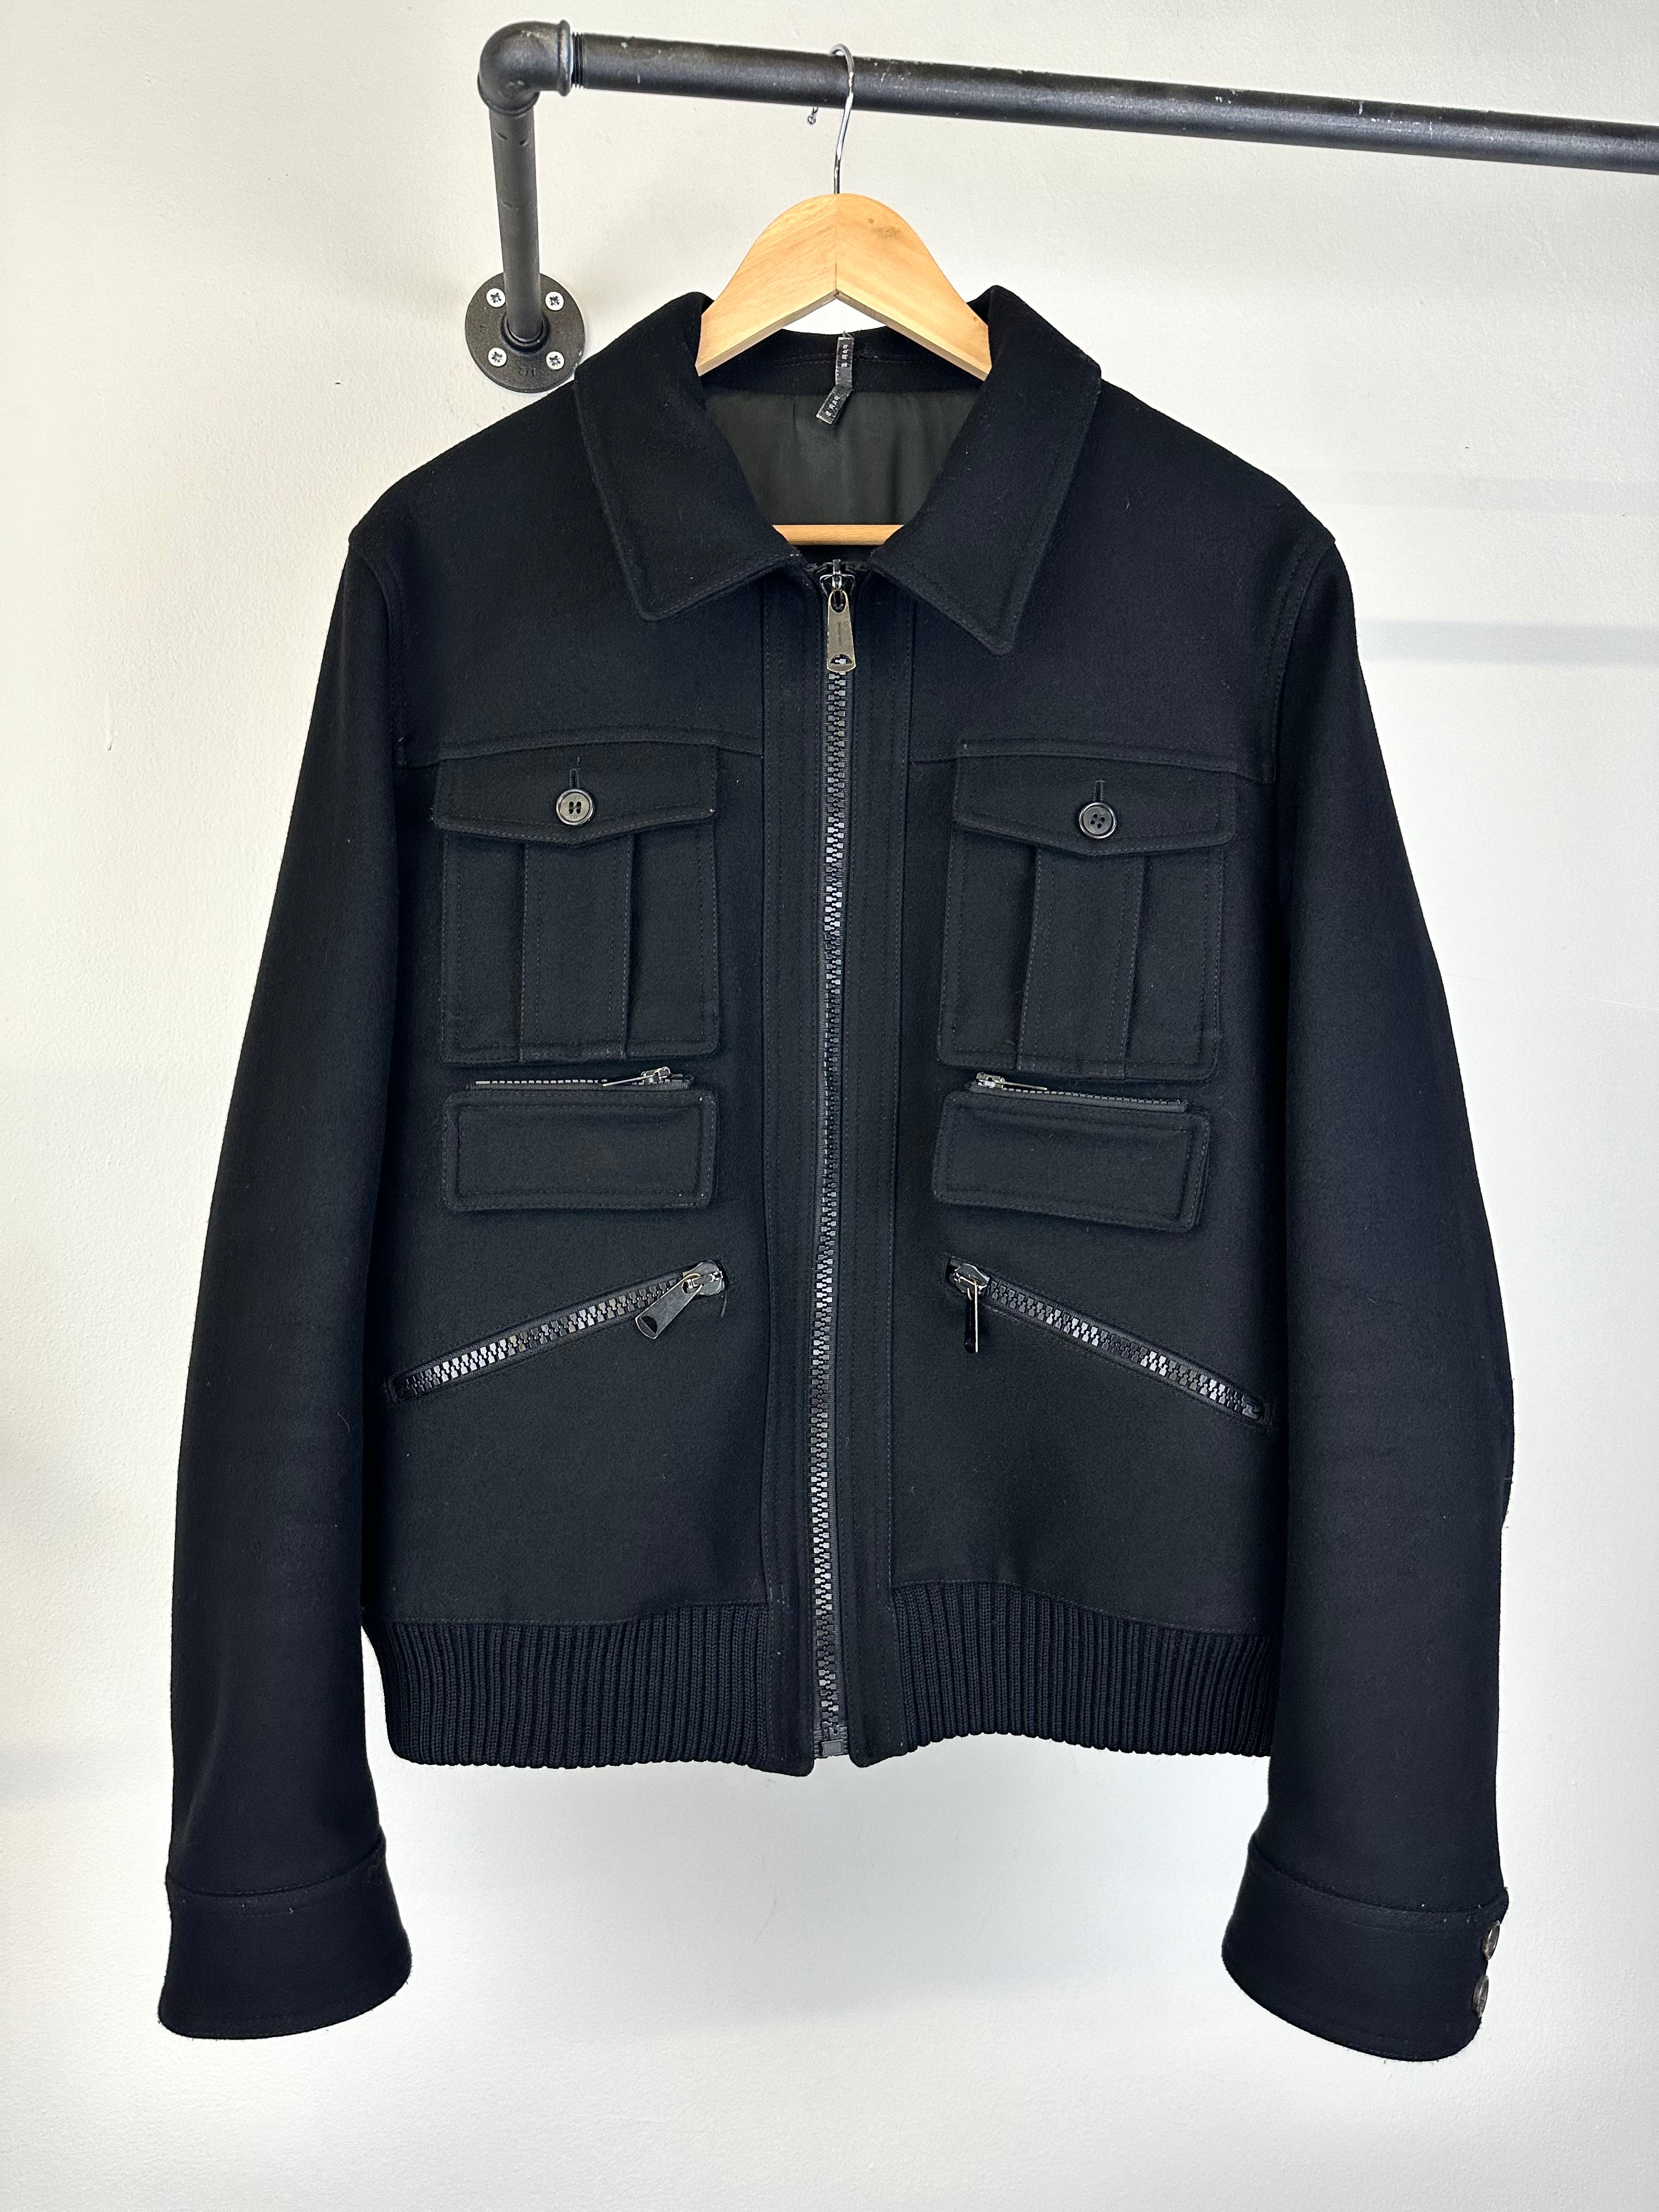 AW06 Dior by Hedi Slimane military bomber jacket – elevated archives